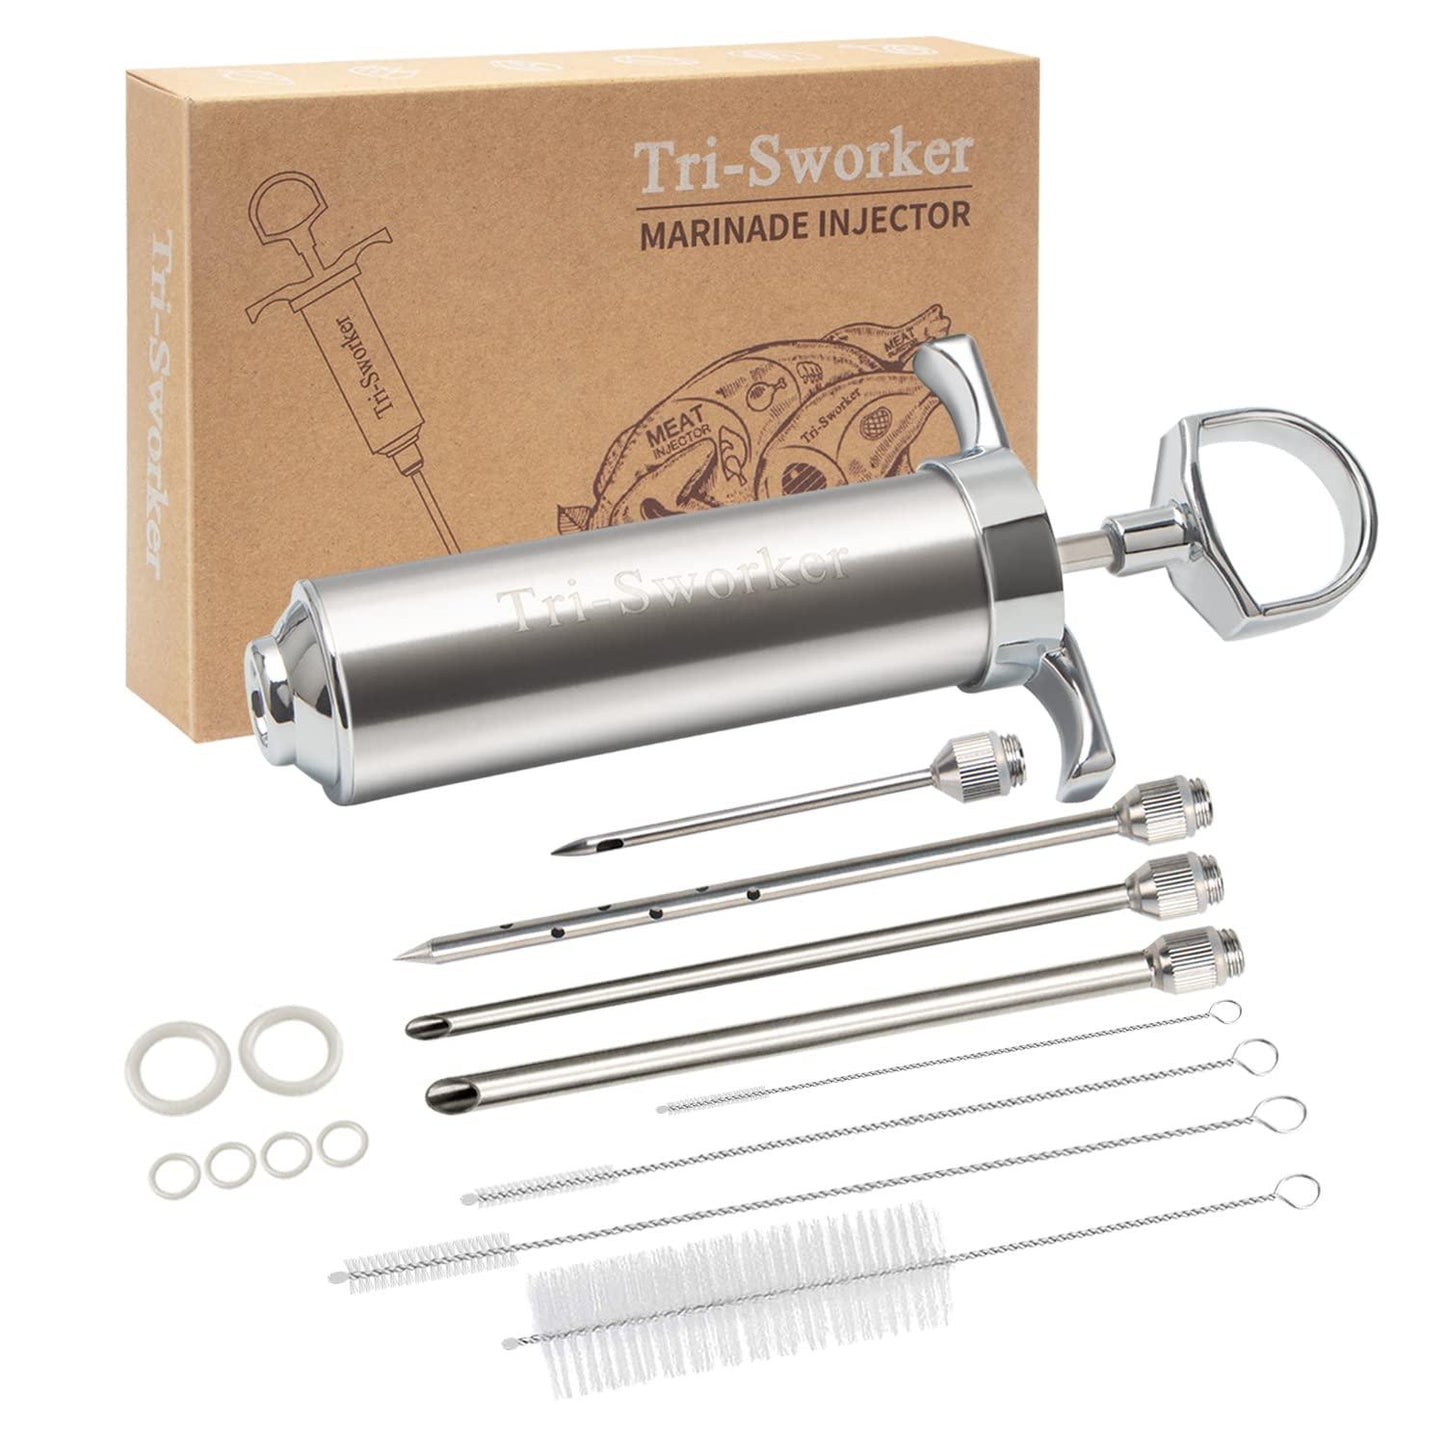 Tri-Sworker Meat Injector Syringe for Smoking with 4 Marinade Flavor Food Injector Needles, Ideal to Injector Marinades for Meats, Turkey, Brisket, Beef; 2-OZ Capacity - CookCave